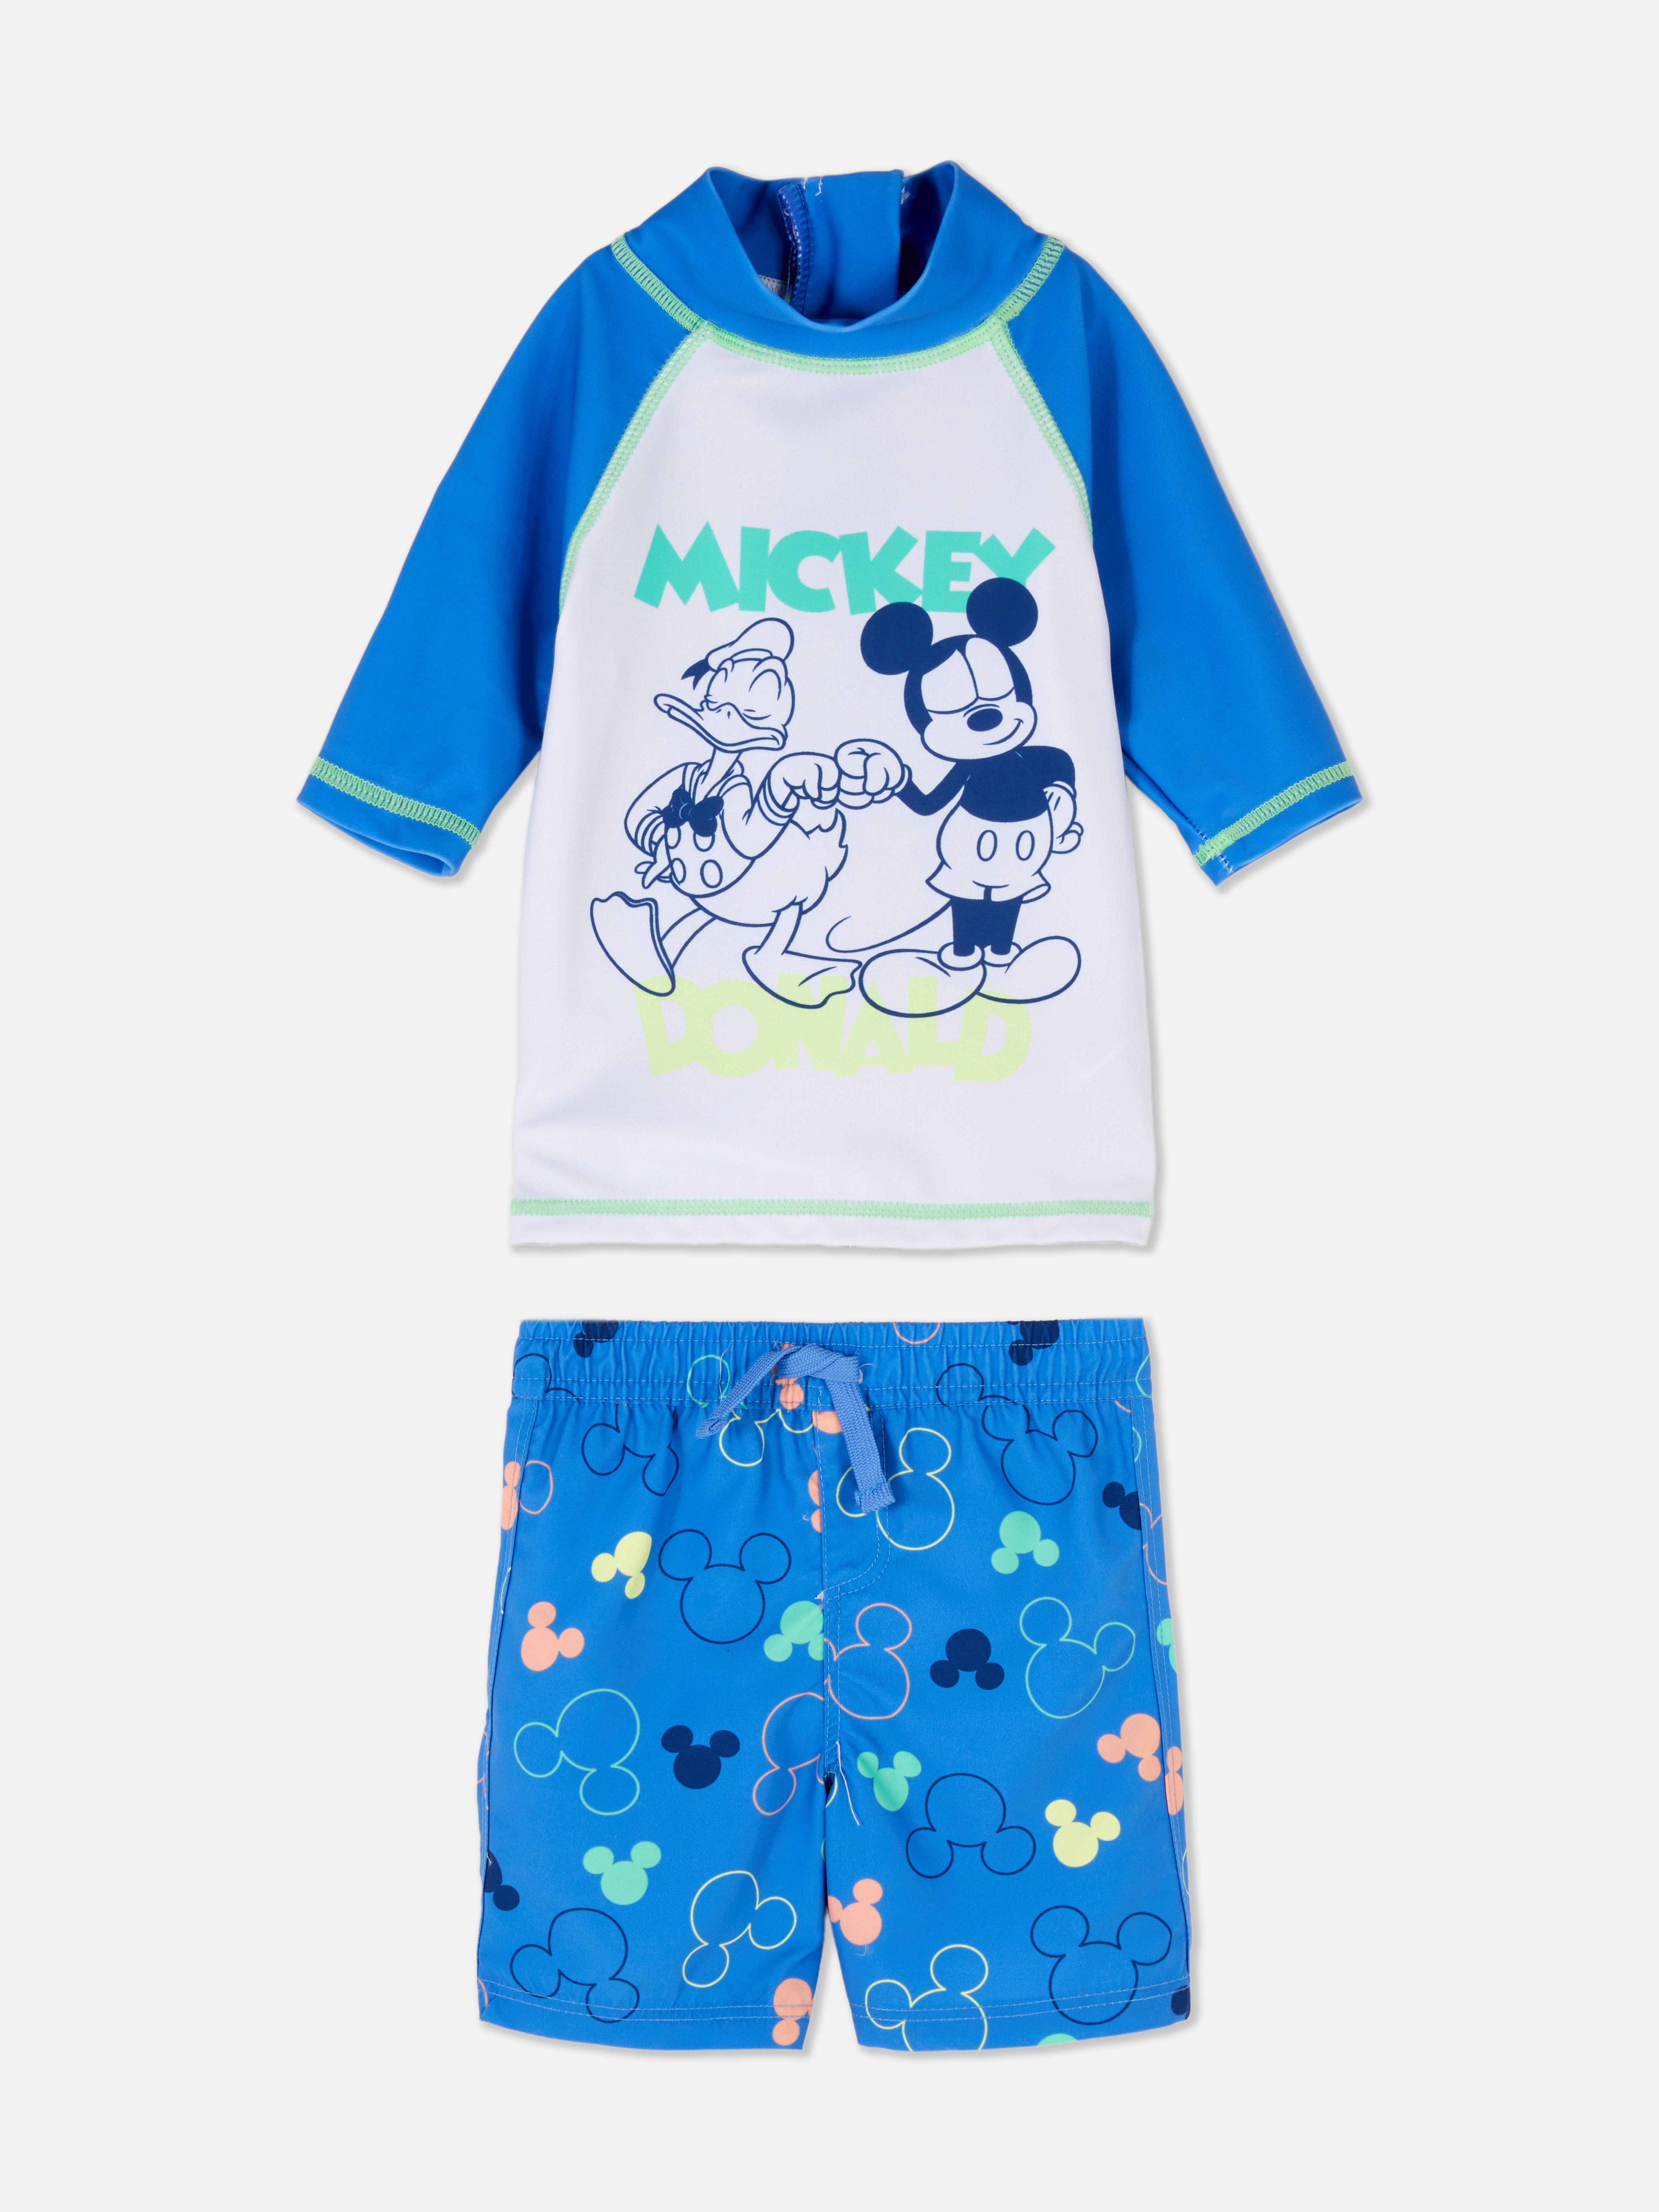 Disney’s Mickey Mouse and Donald Duck Swim Set